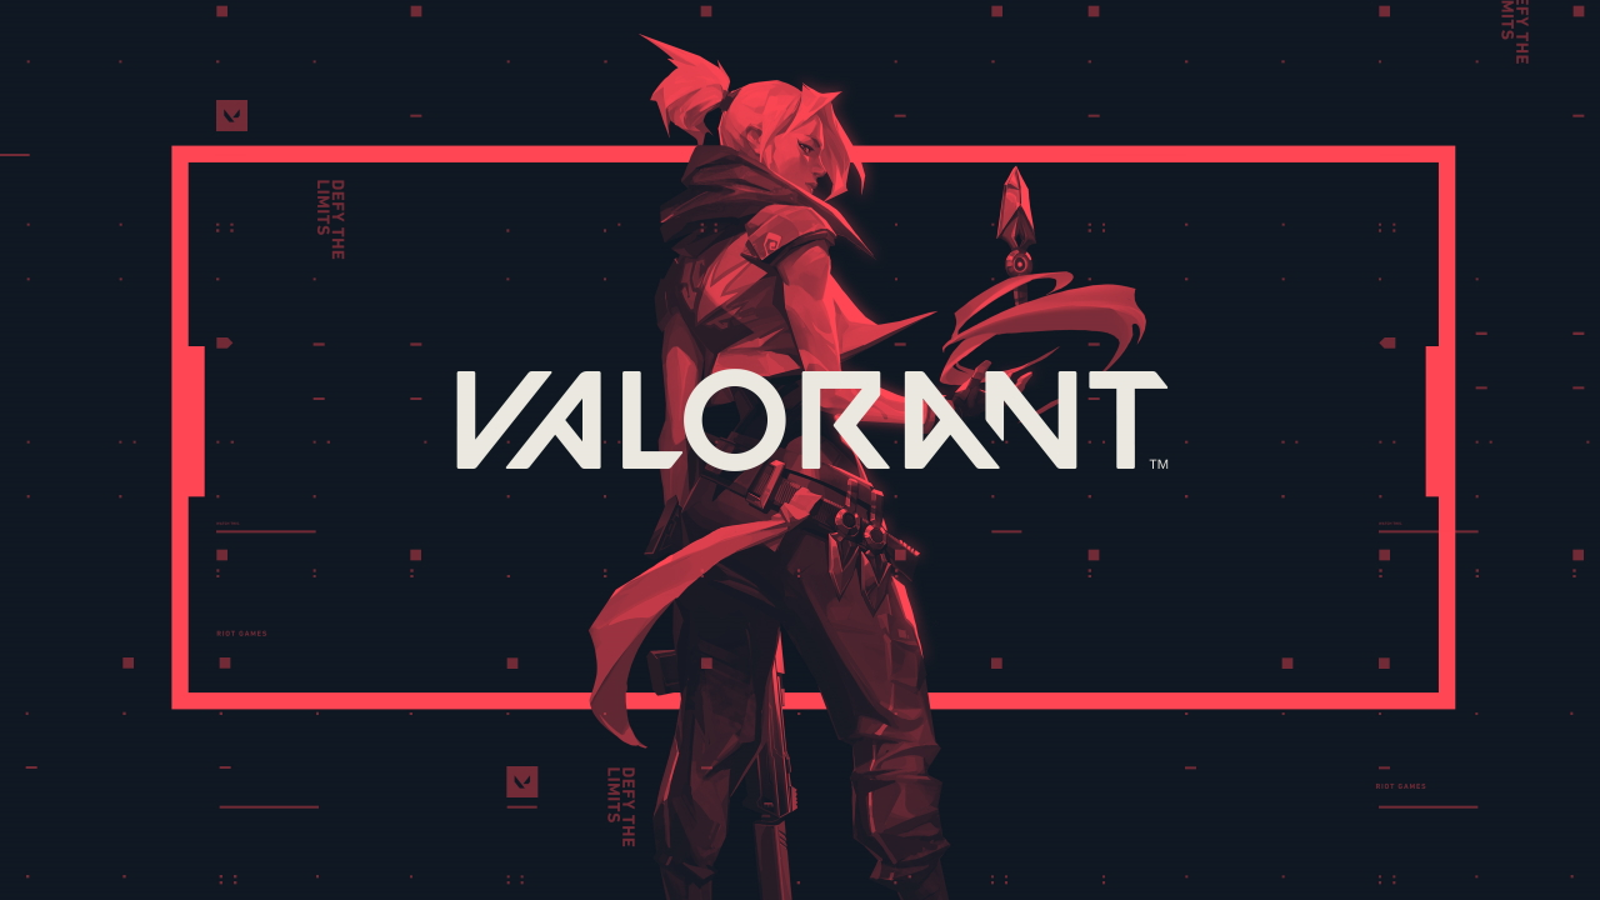 Here's what you need to know about Valorant's two launch maps